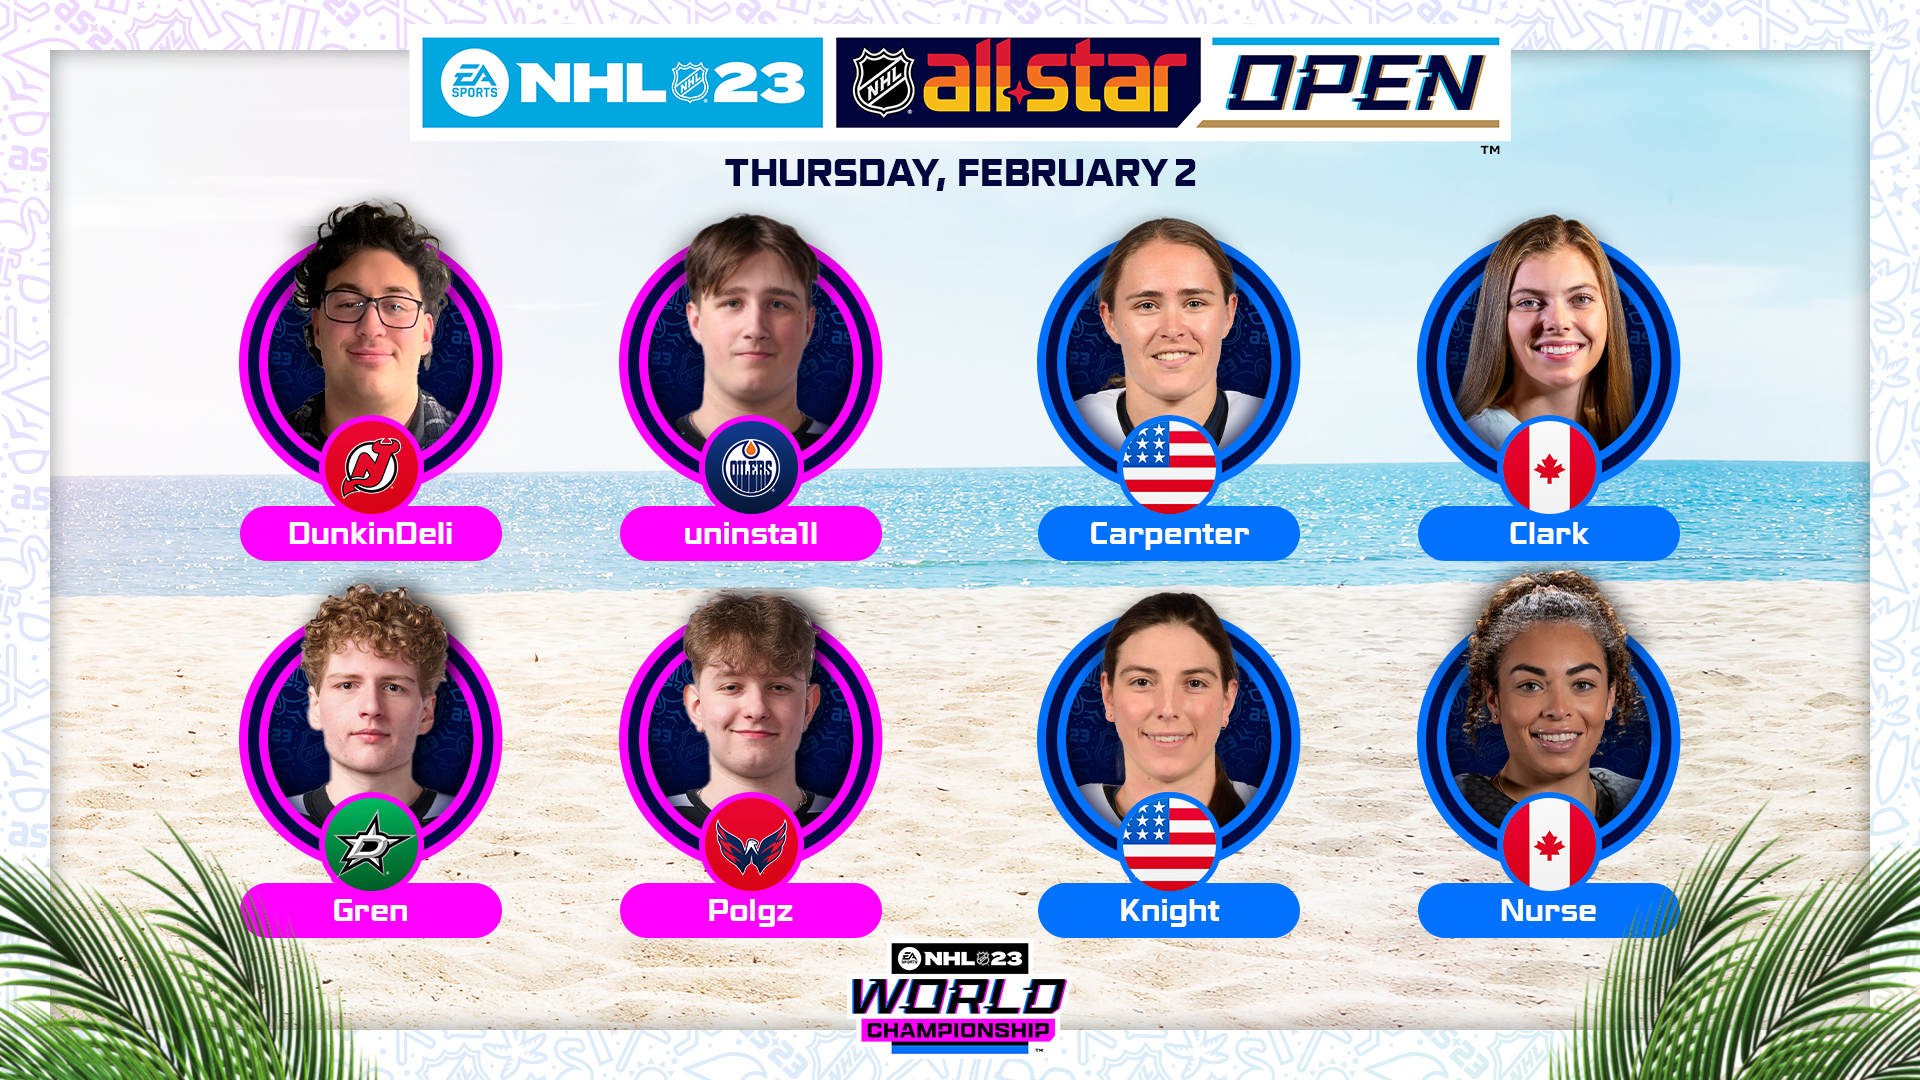 Inaugural EA SPORTS NHL 23 All-Star Final to Take Place at Fort Lauderdale Beach, Thursday, Feb